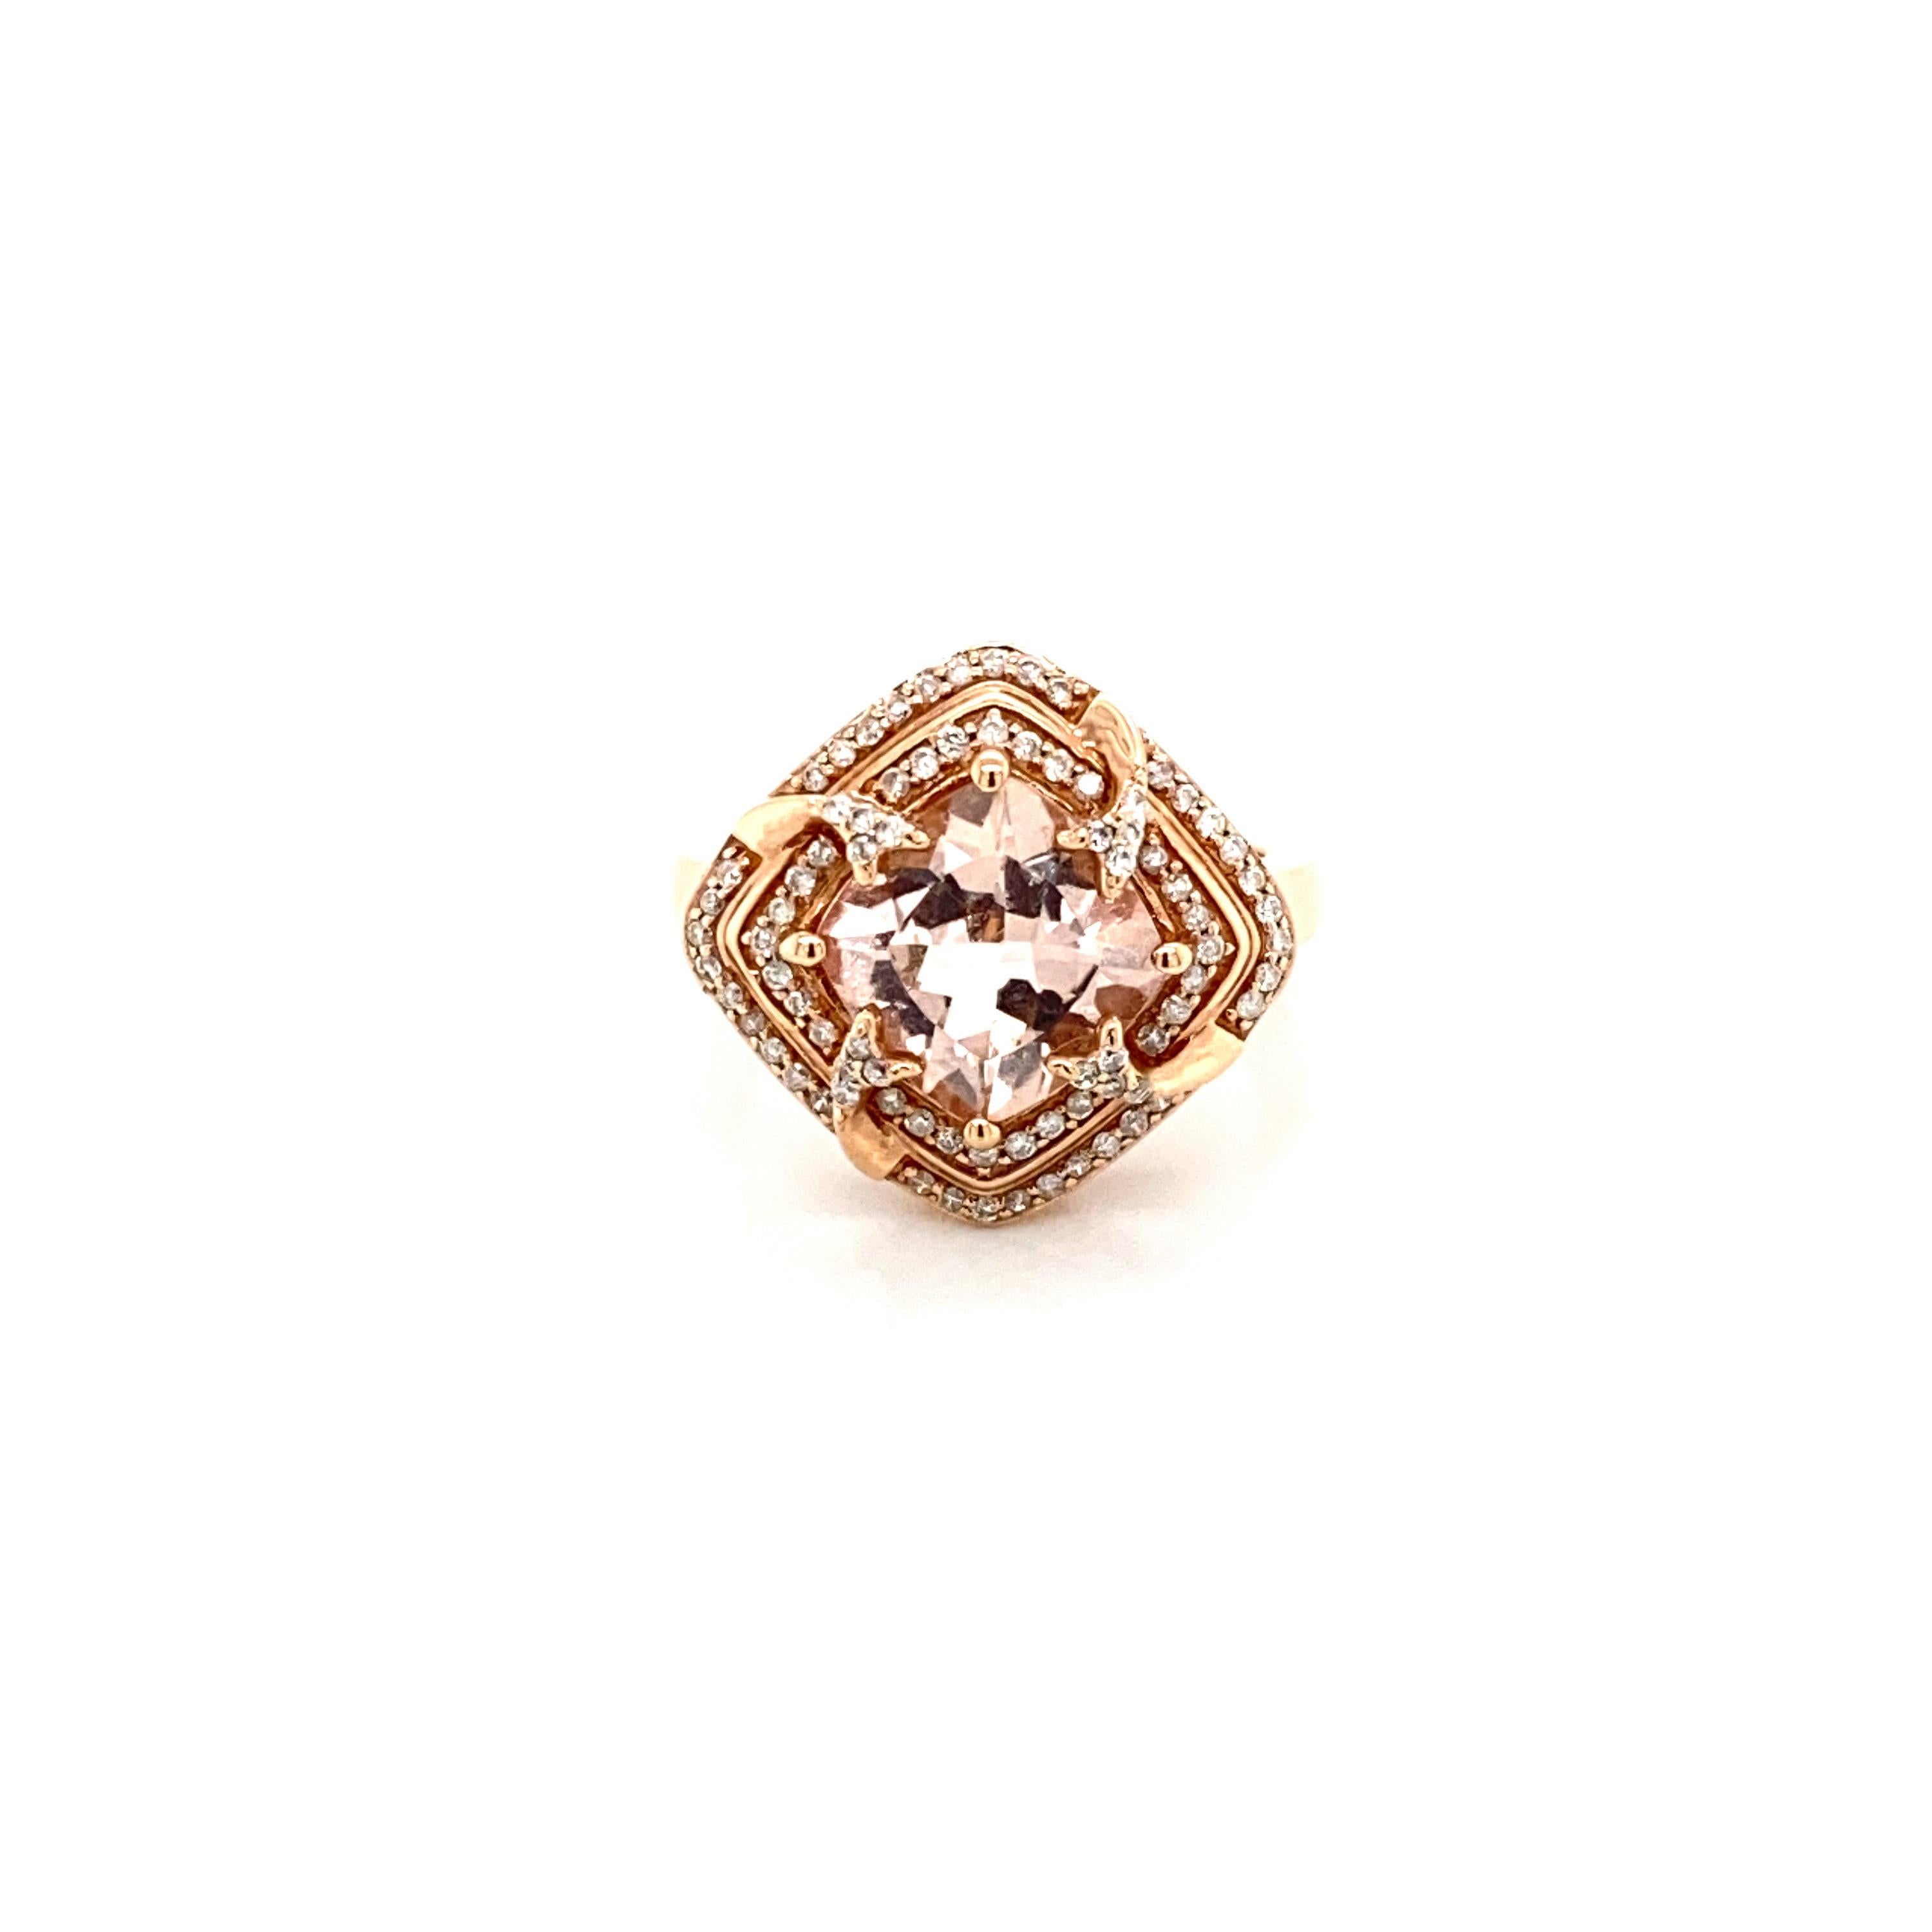 This stunning natural morganite and diamond double halo ring is set in solid 14K rose gold. The natural 2.89 Ct Cushion cut morganite has an excellent peachy pink color (AAA quality gem) and is surrounded by a double halo of round cut white